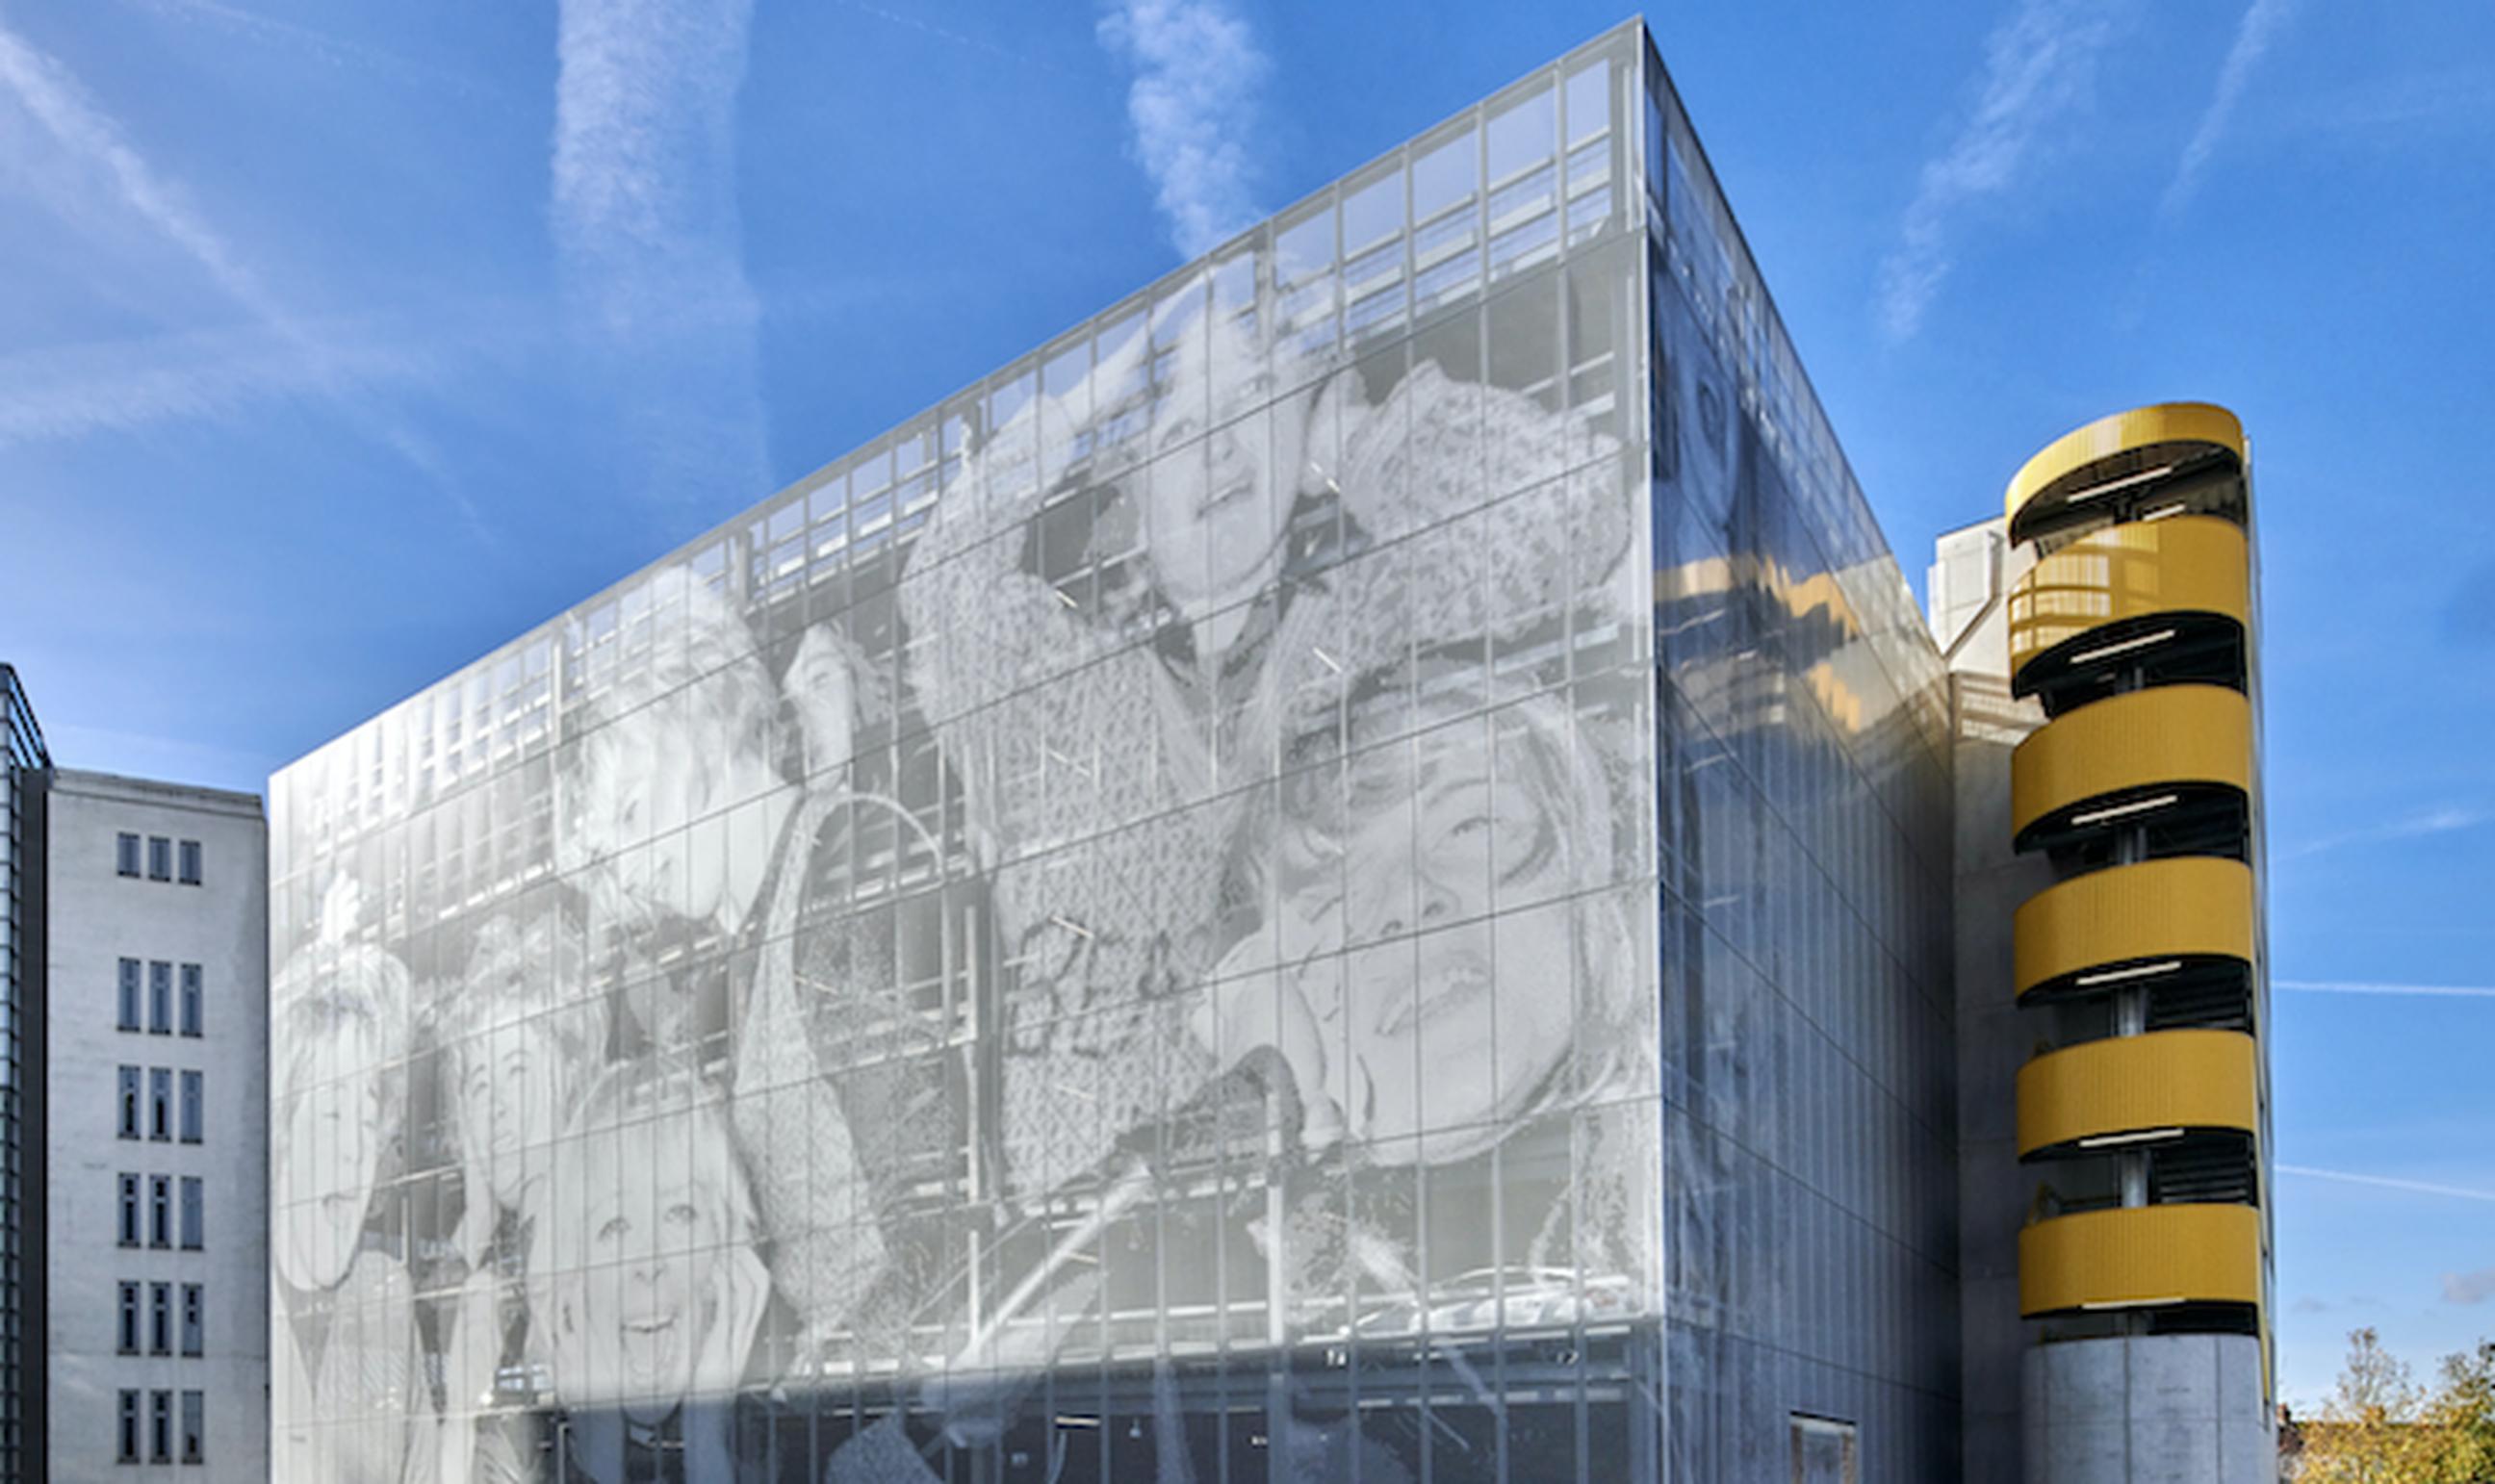 Studio Egret West designed a façade for The Music Box at The Old Vinyl Factory that uses an image of Beatles fans in a nod to site’s former life as a record factory